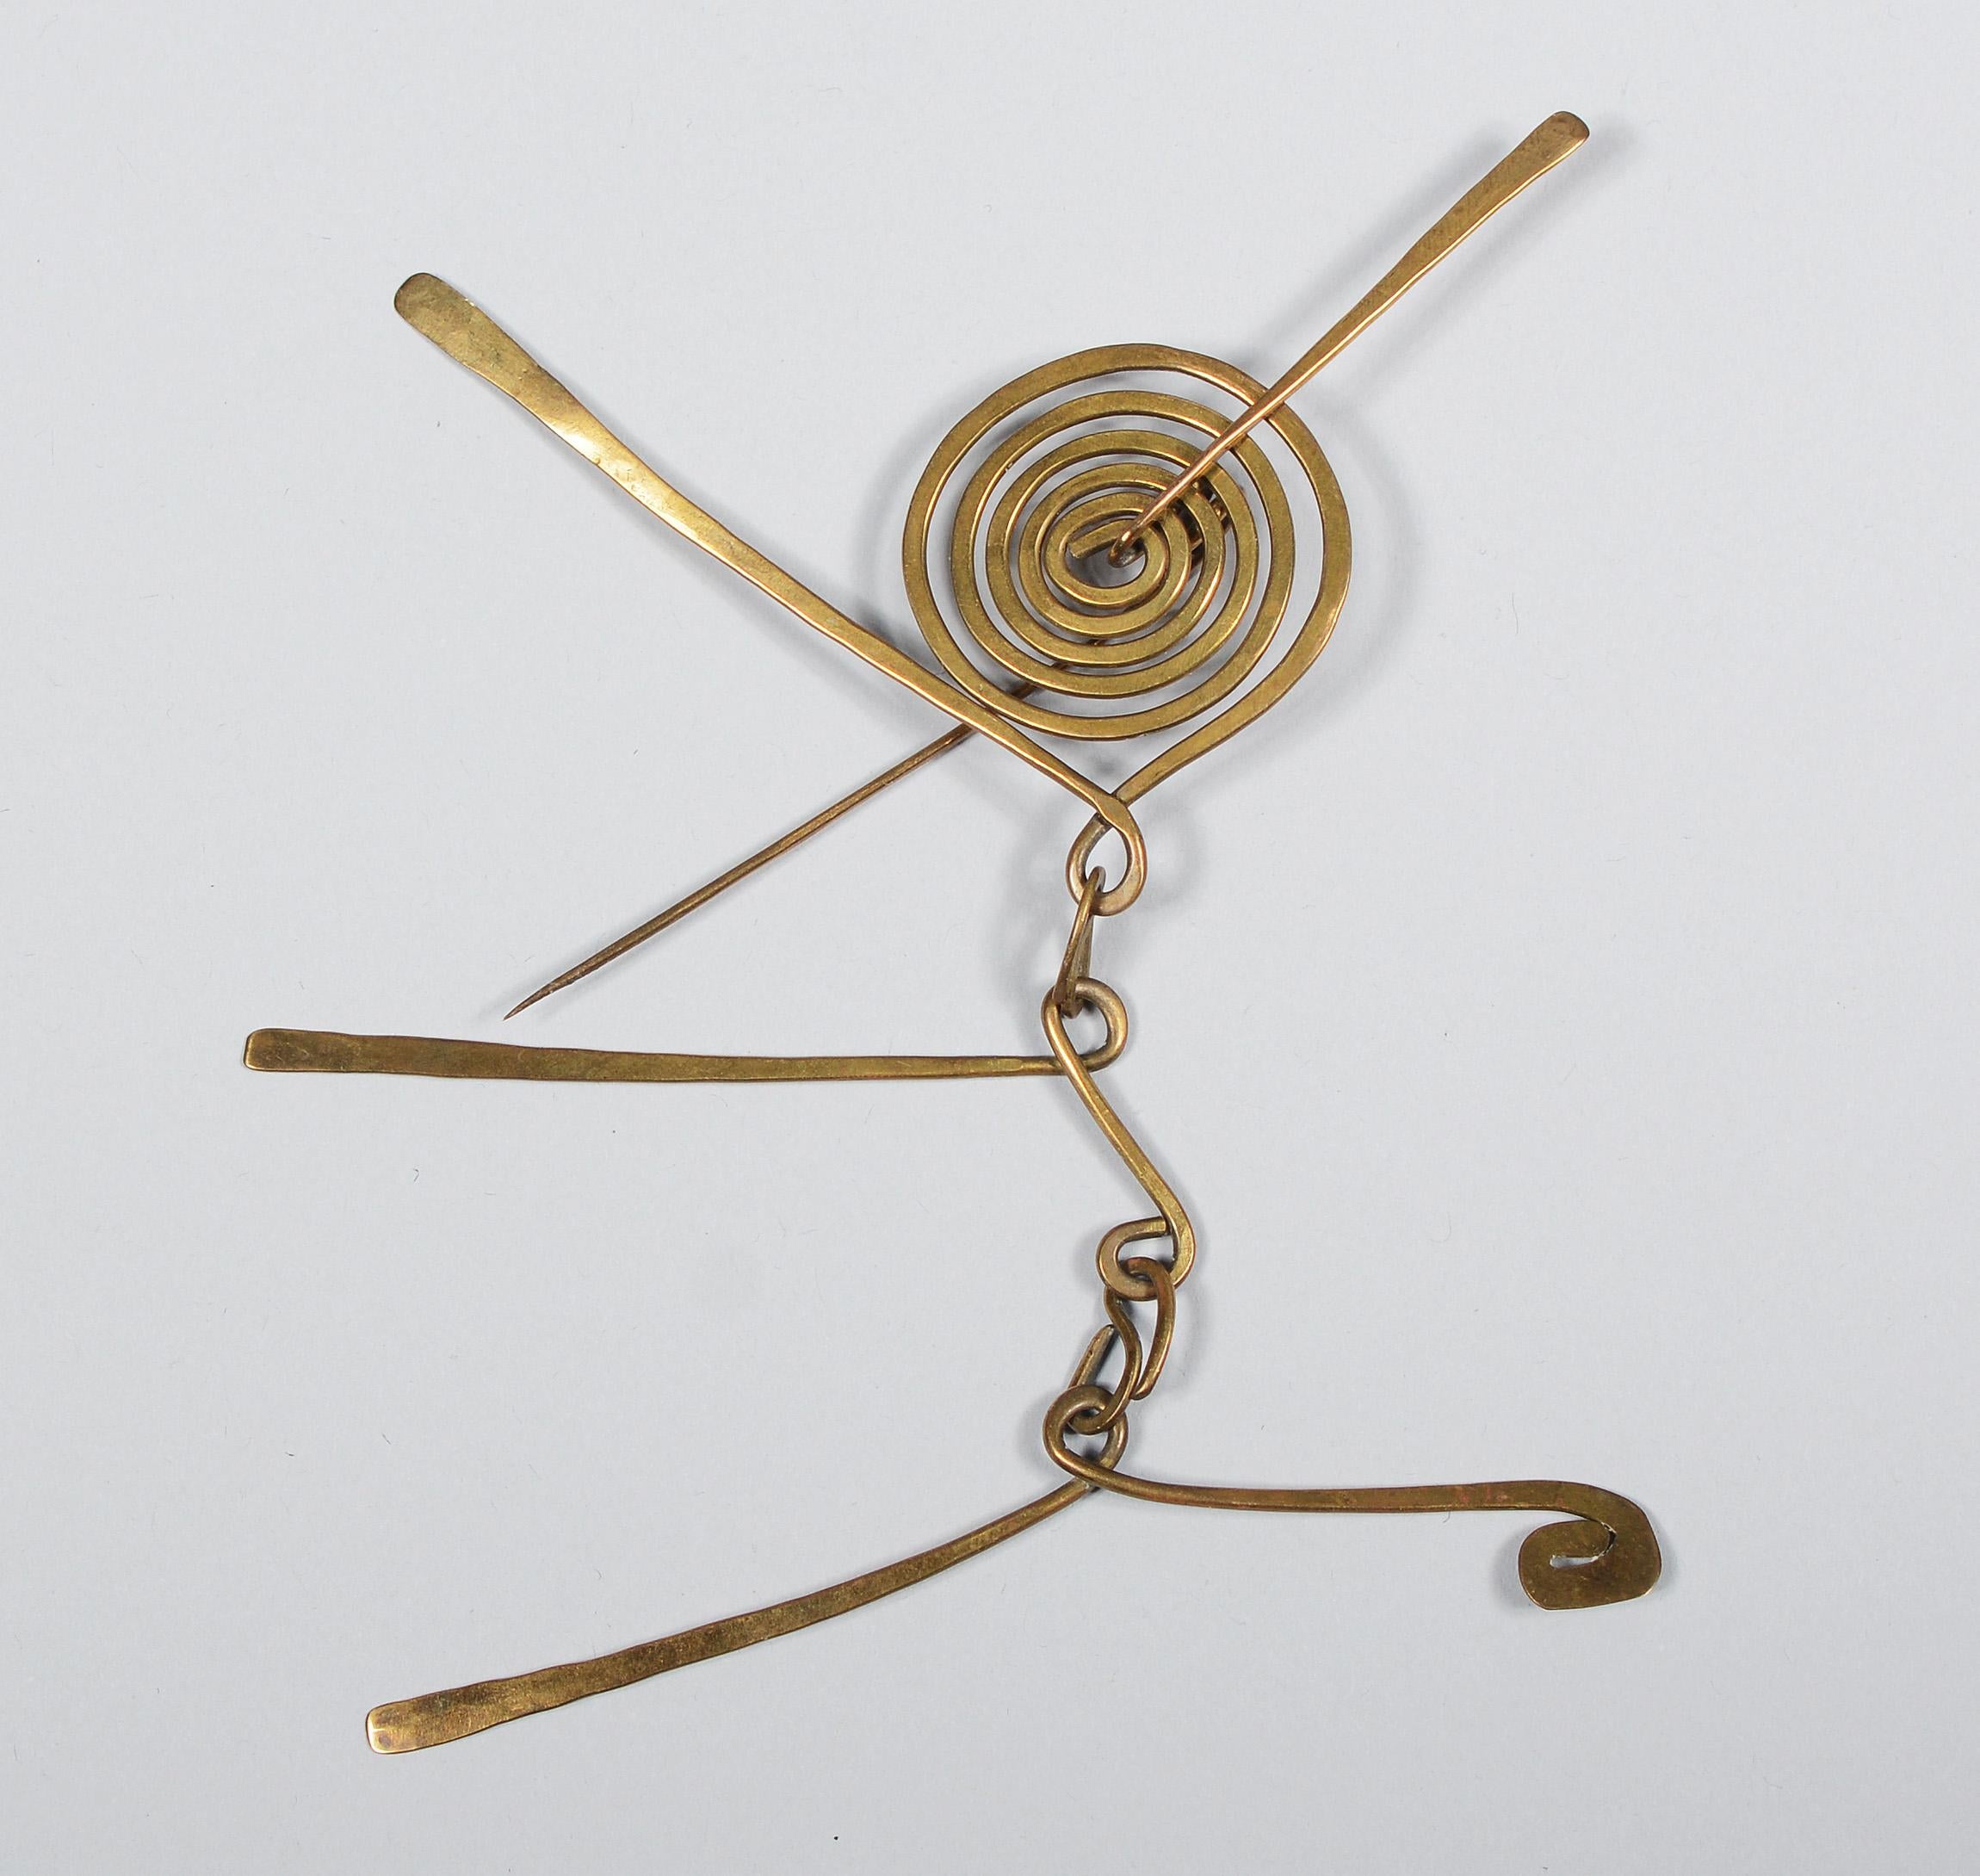 Articulated brass brooch and earrings by the artist Claire Falkenstein. The spiral on the brooch rotates on the pin that pierces the through the center of it. The arms below are like a small mobile. On one pair of earrings the inner spiral rotates